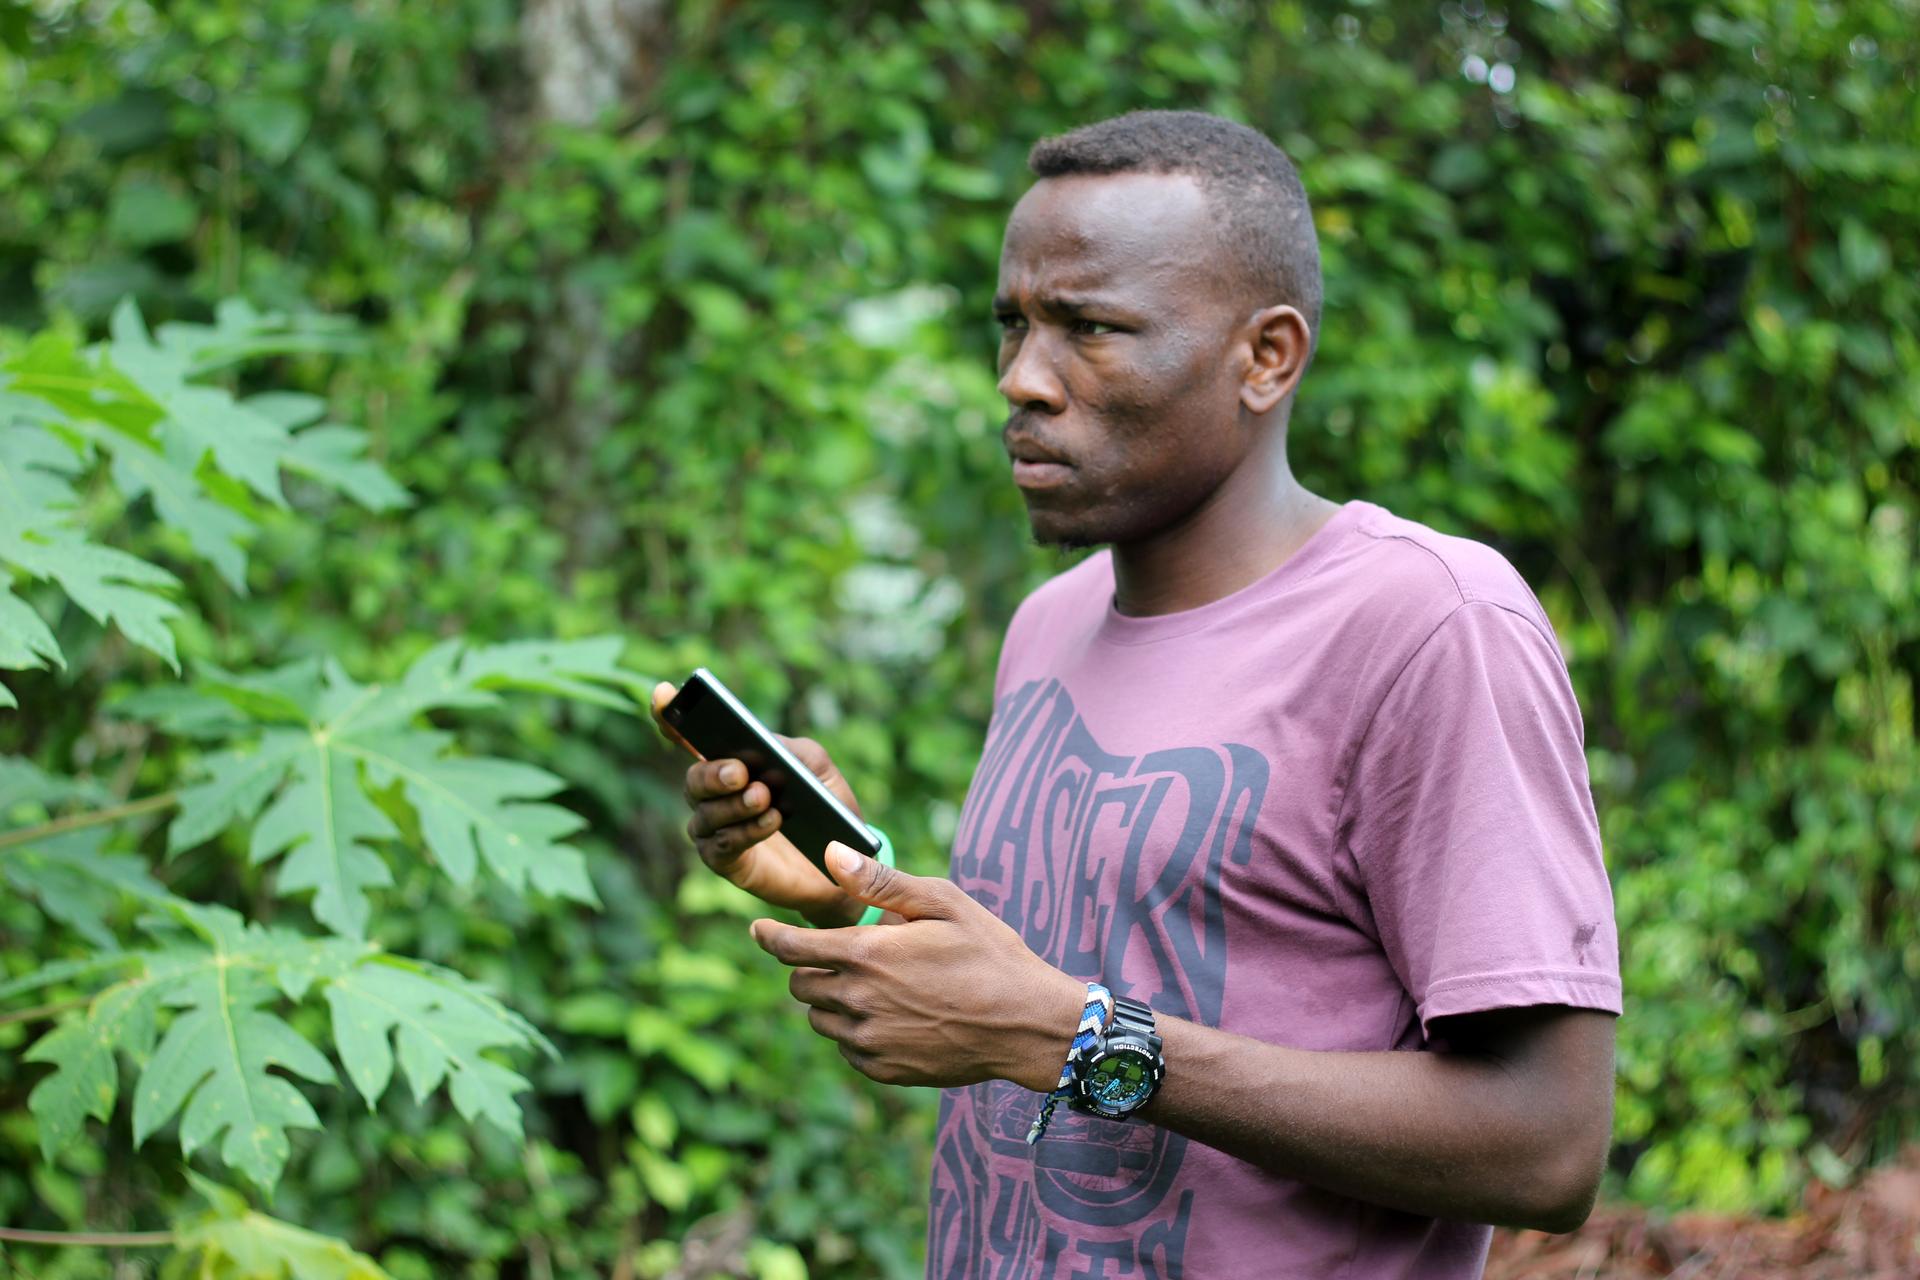 Aziz with his smart phone at the Manus Island detention camp on Papua New Guinea. The smart phone is his link to the outside world and how he sends WhatsApp audio messages to Michael Green.